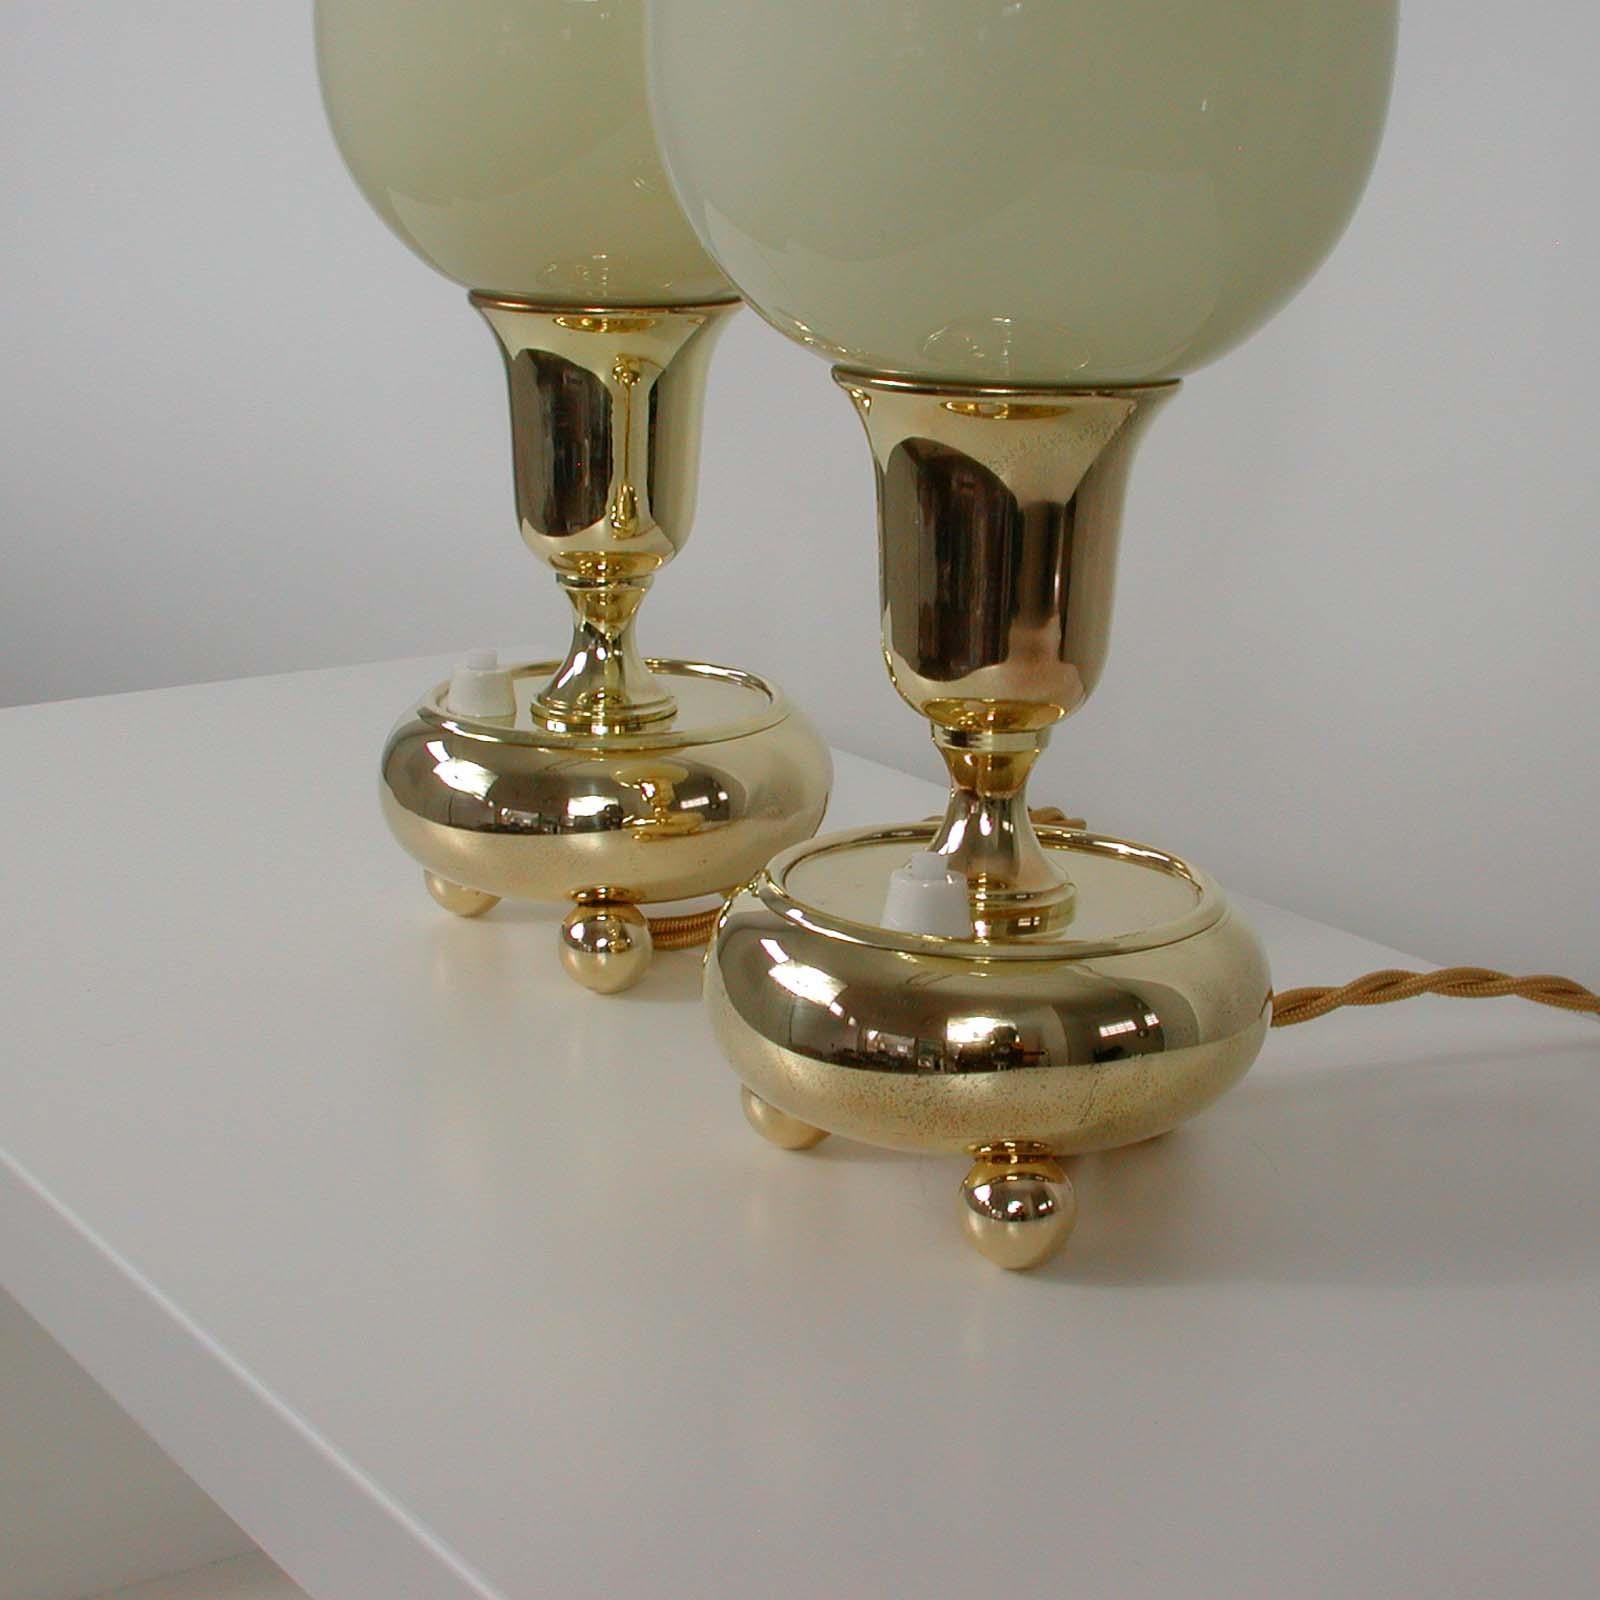 German Bauhaus Brass and Opal Torchiere Table Lamps, Set of 2, 1930s For Sale 1